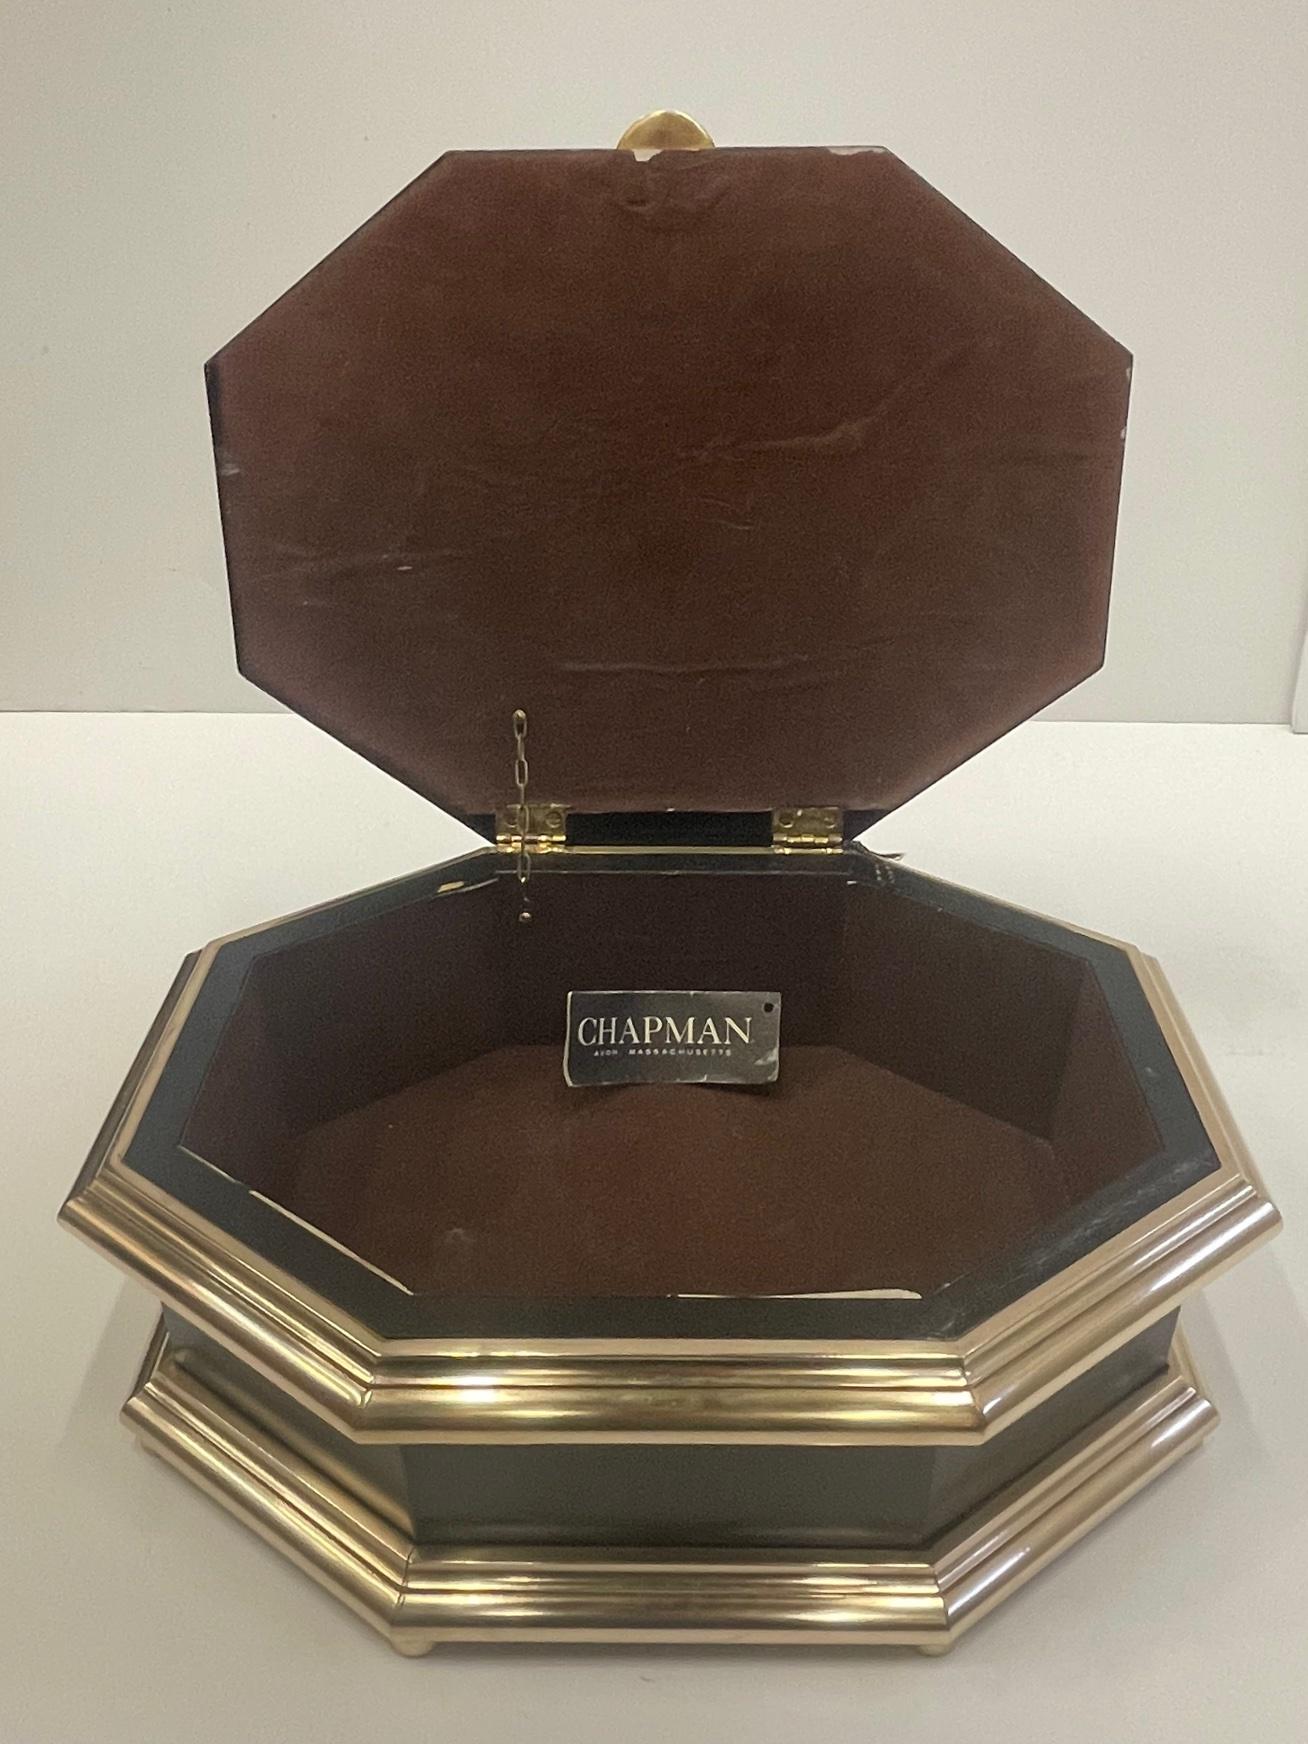 Rich Chapman Black Laquer Brass & Mirrored Octagonal Oblong Treasure Box In Good Condition For Sale In Hopewell, NJ